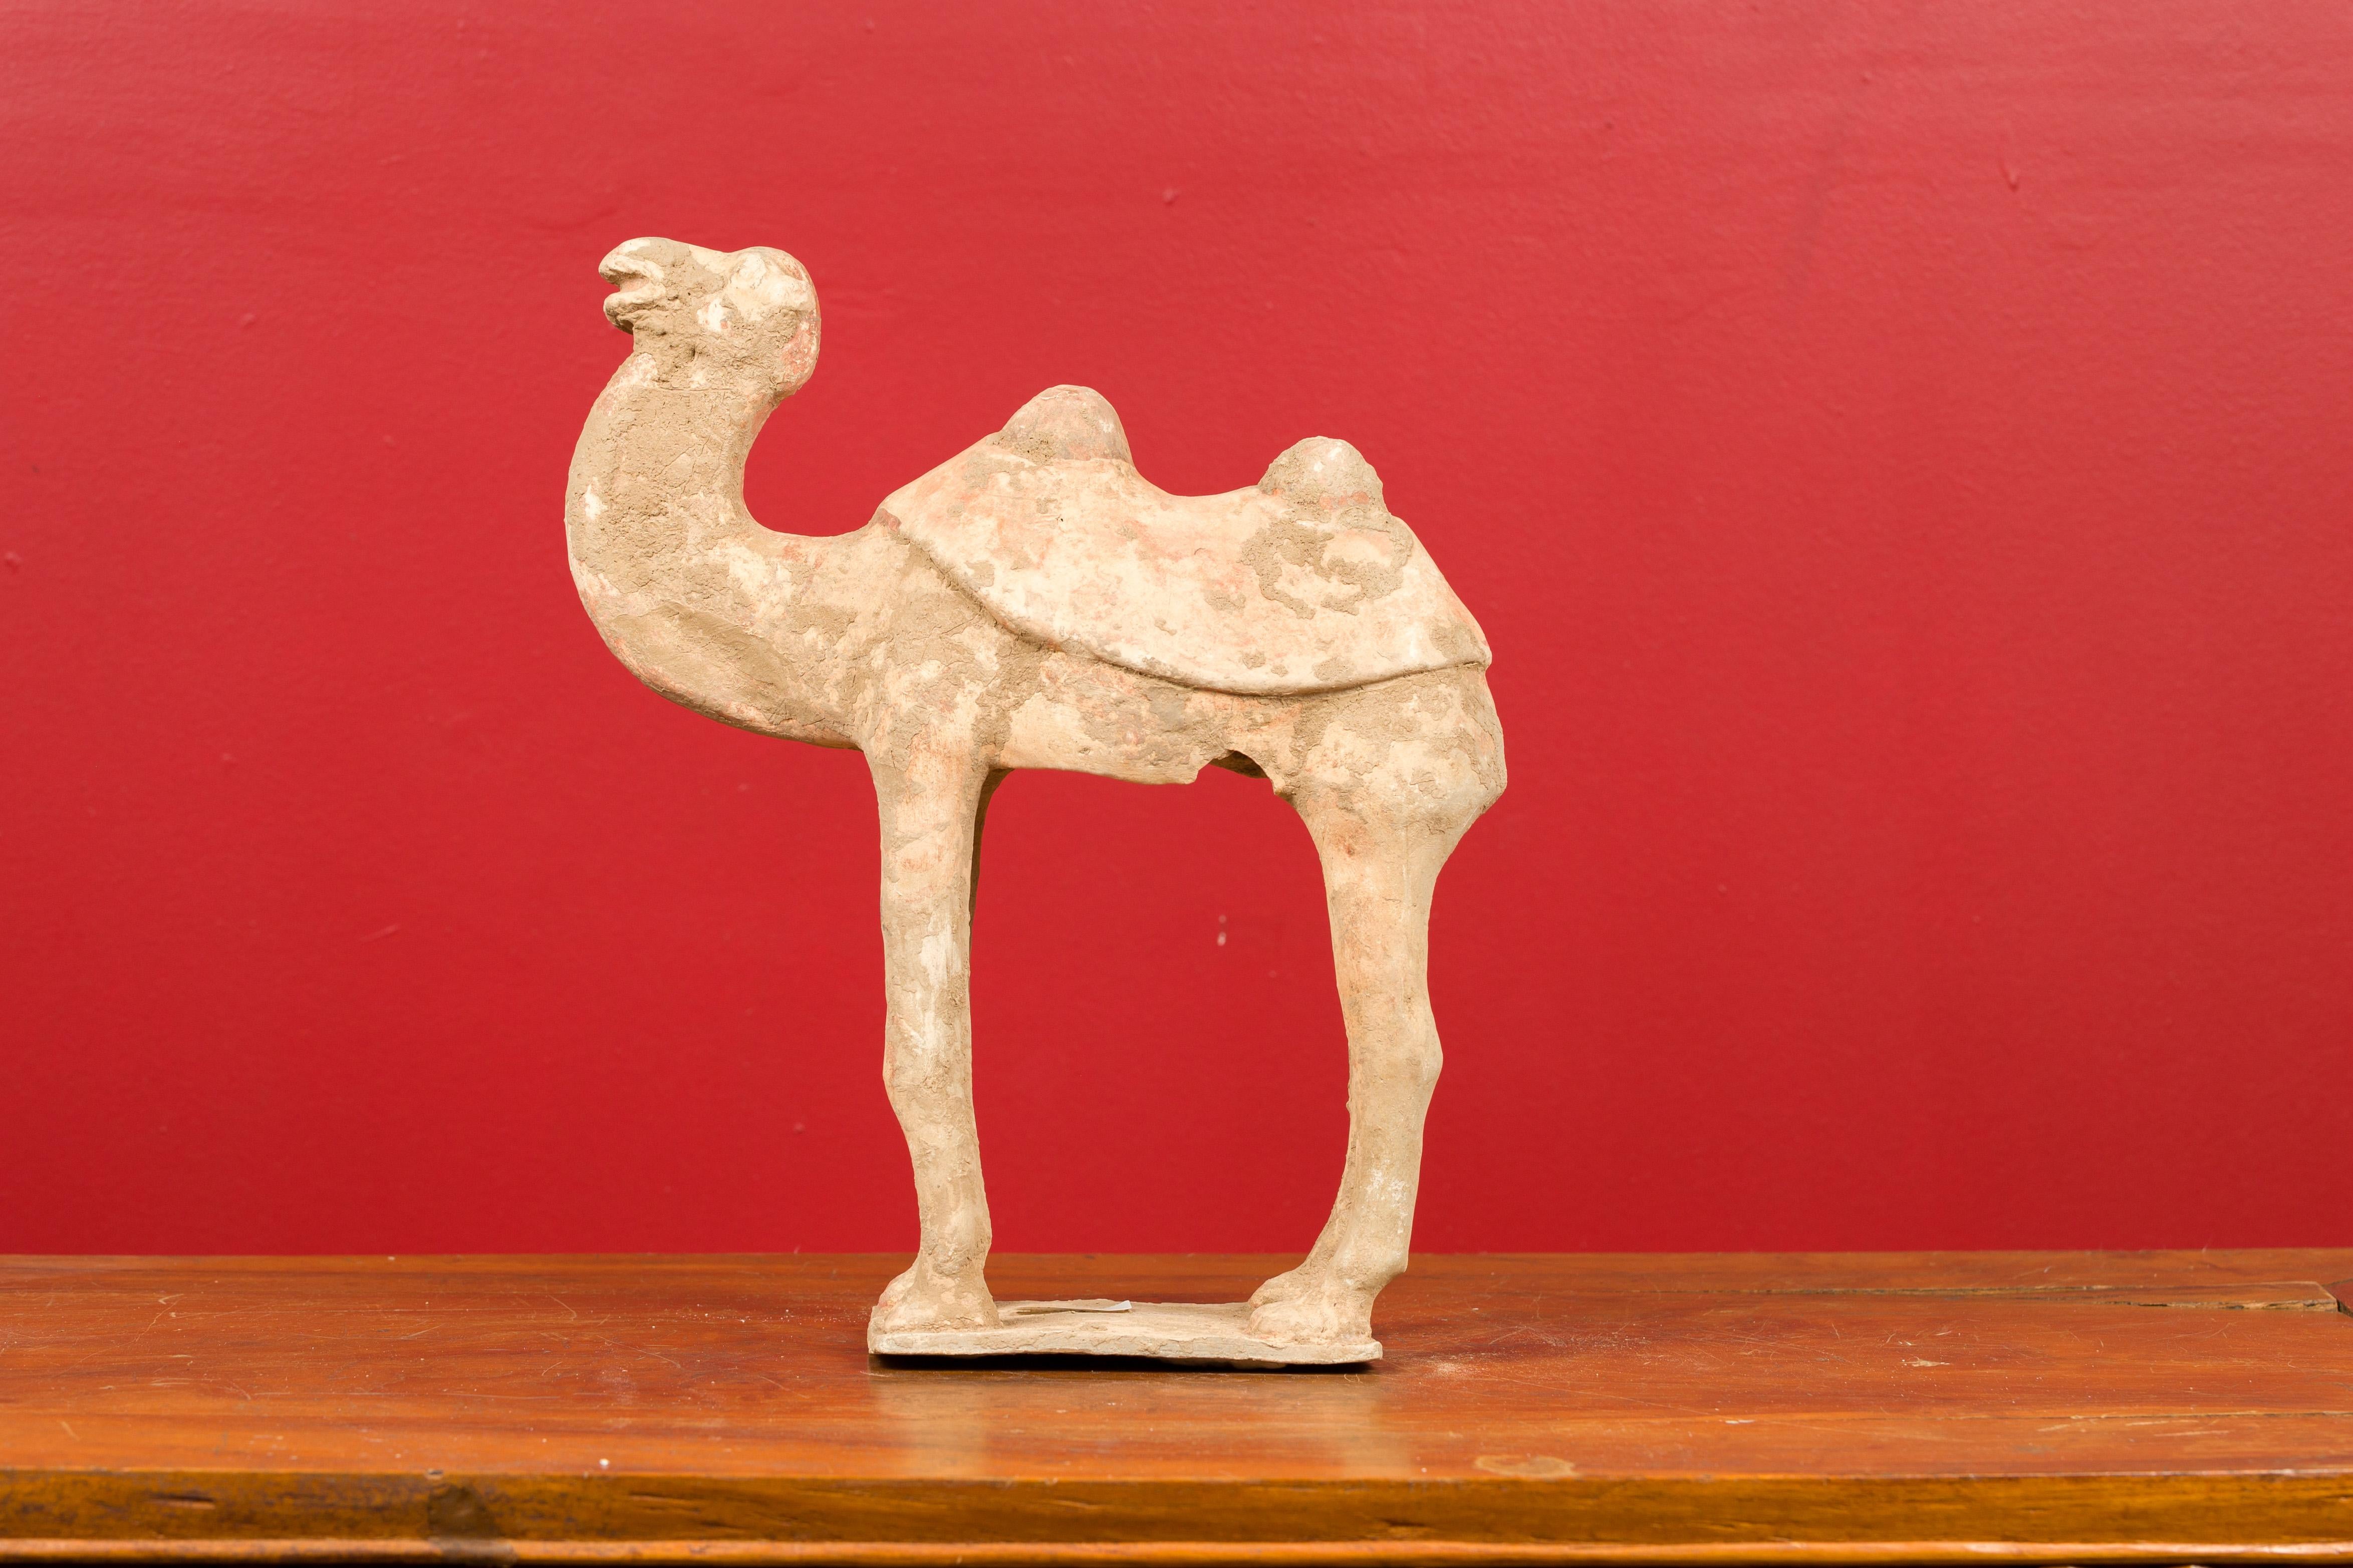 A Chinese Han Dynasty period mingqi terracotta camel circa 202 BC-200 AD, with traces of original orange paint fragments. Created in China during the Han Dynasty, this mingqi, a funerary statue created to be buried with the deceased to secure an